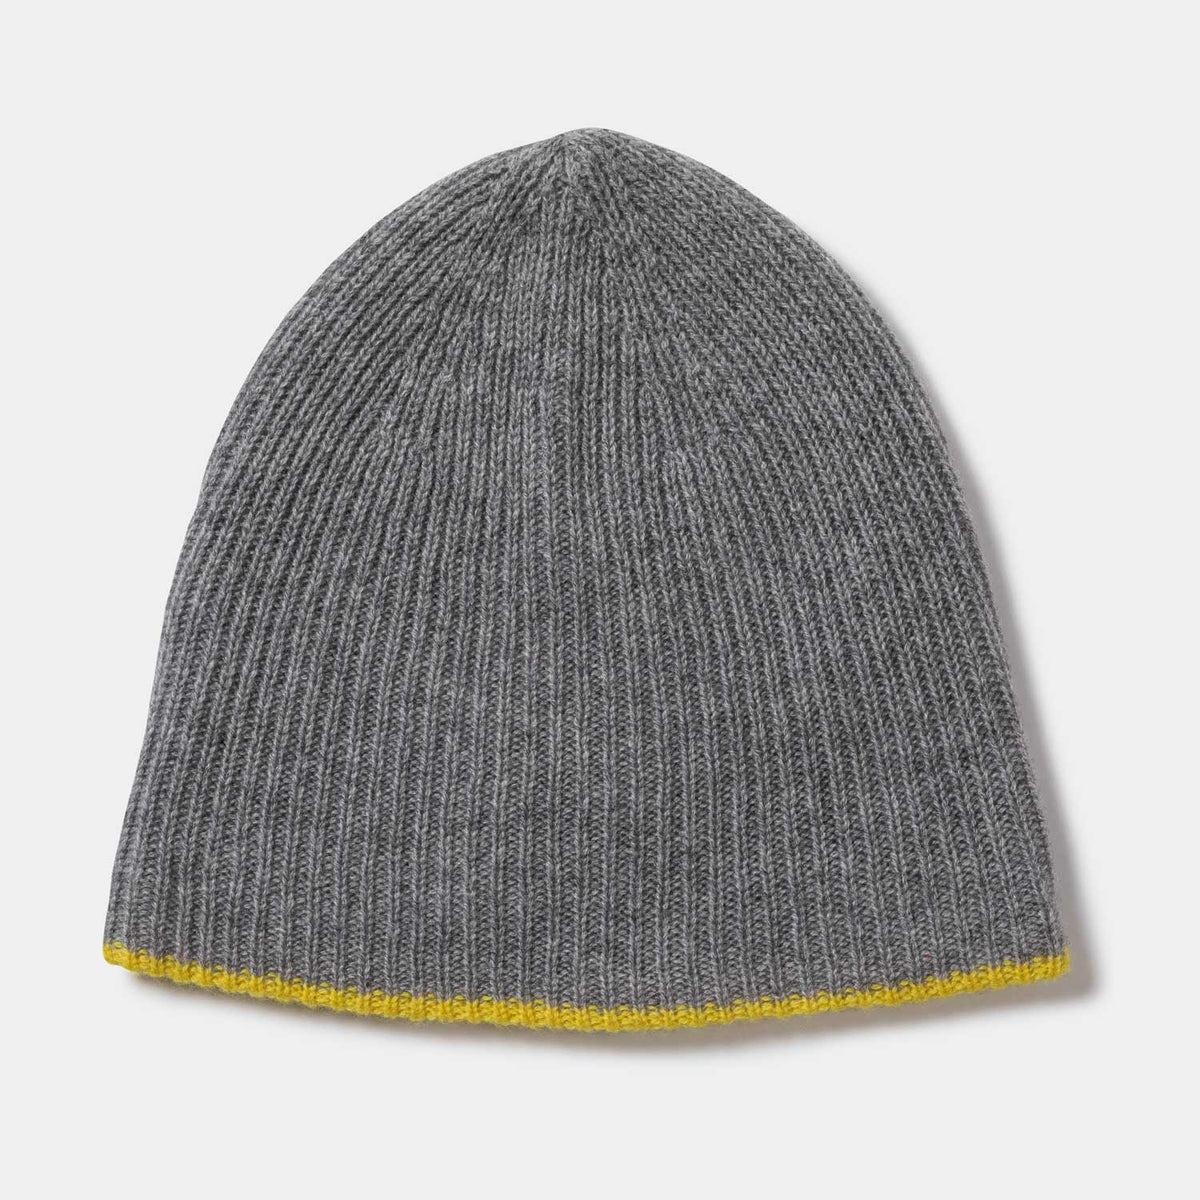 Picture of a double layer knit slouchy hat with colorful tipping in grey with yellow.